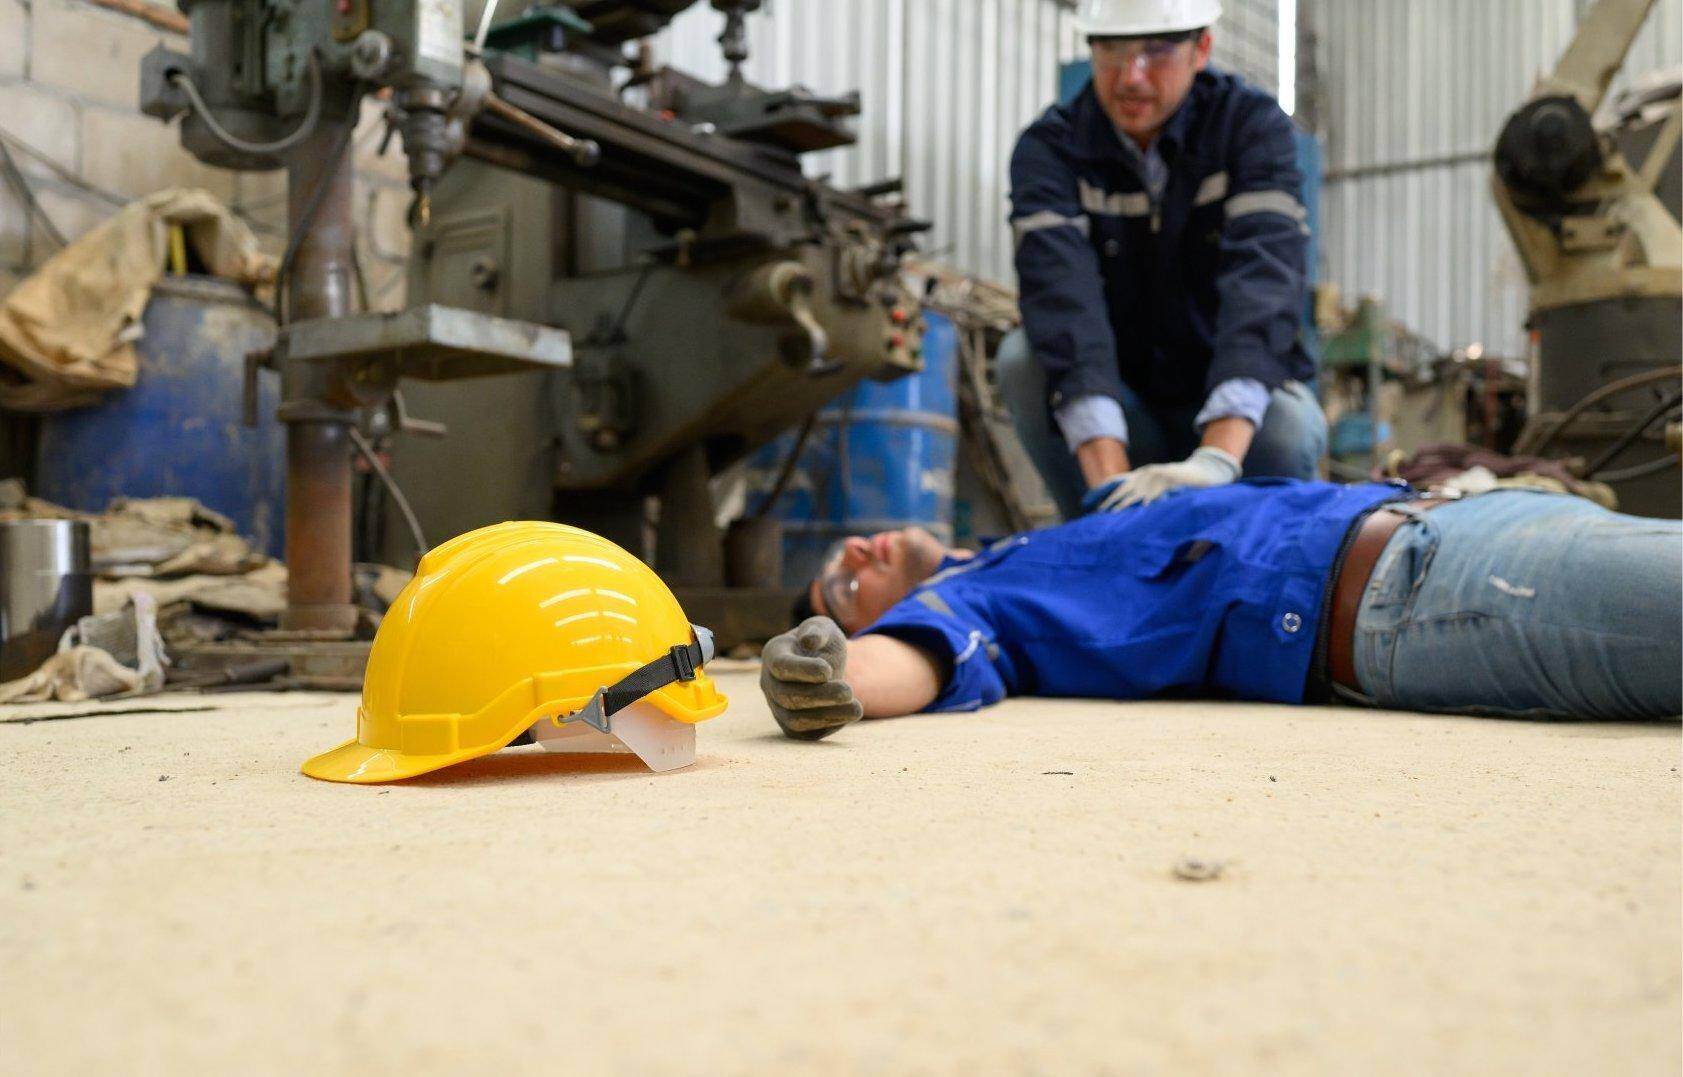 An unconscious man who has been injured on the job who will file for workers compensation in Loganville, Georgia